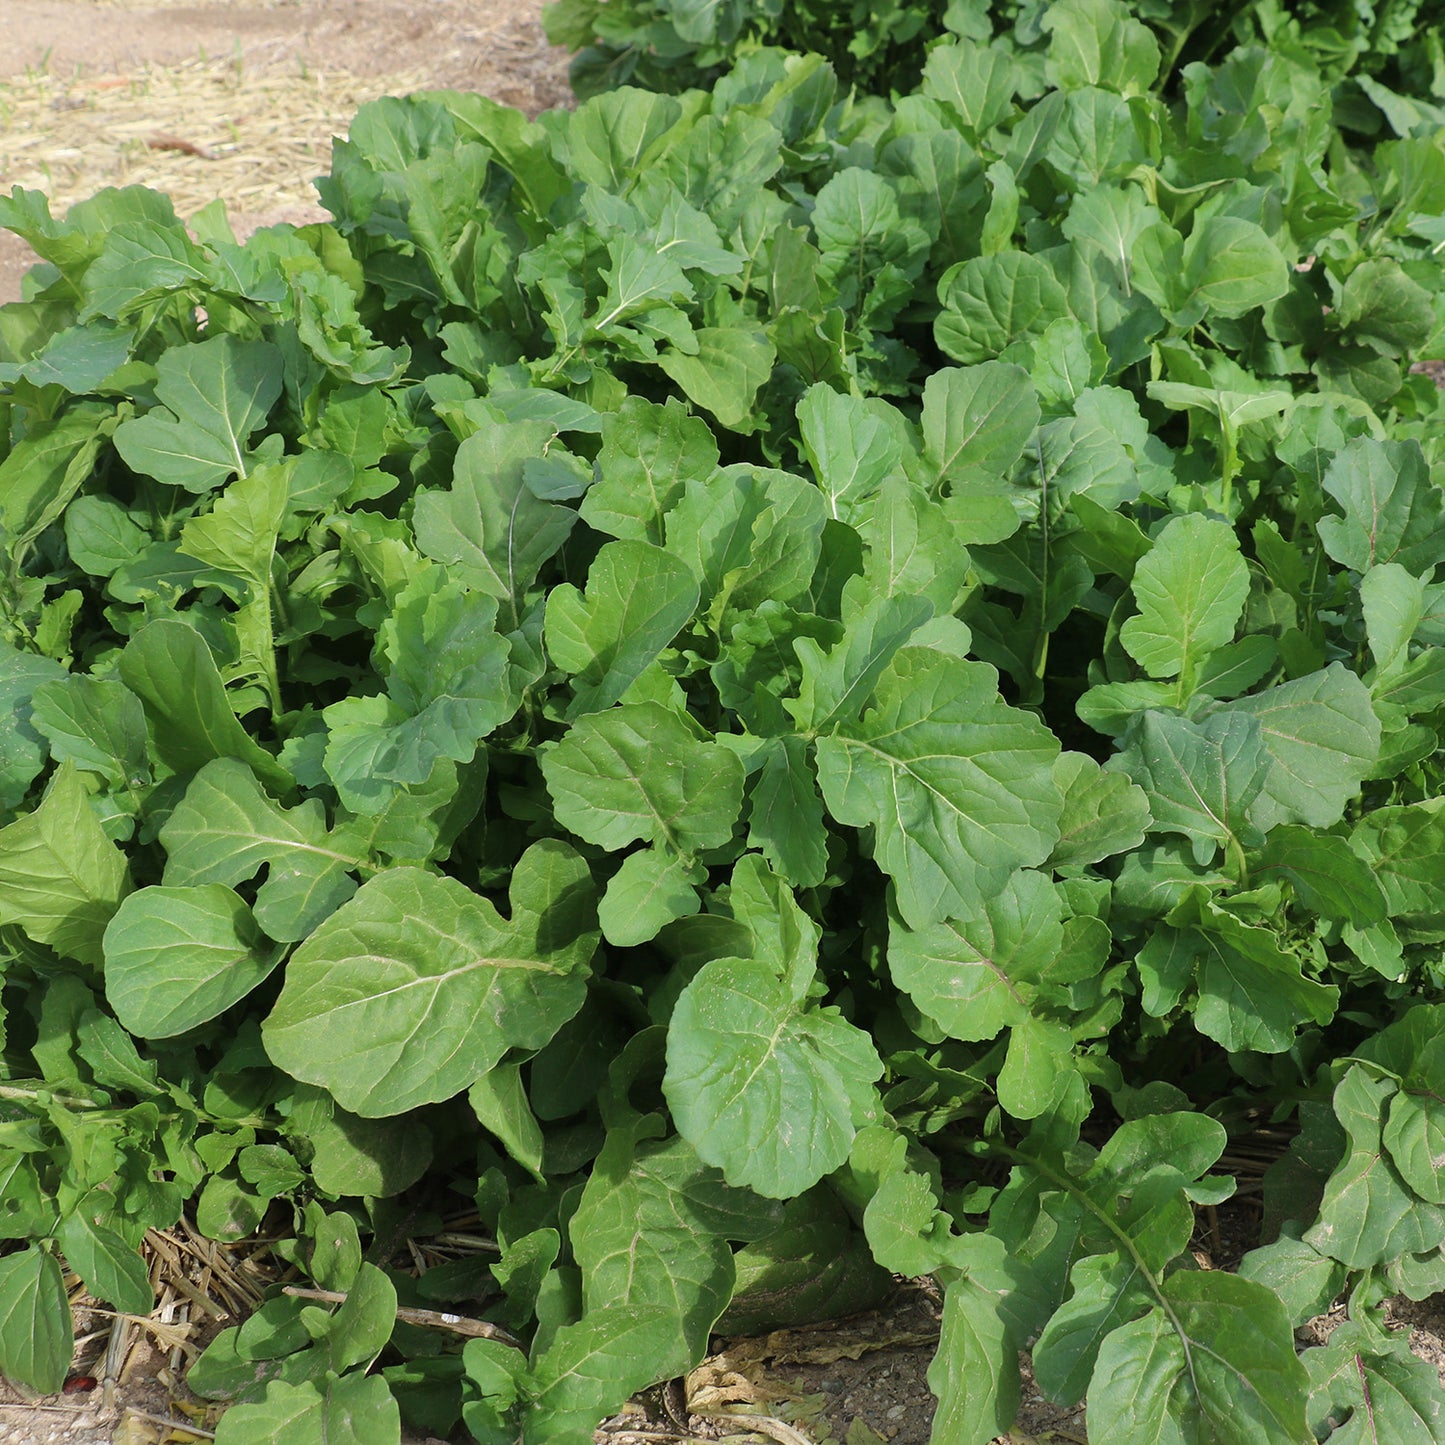 DiMeglio Arugula is both heat and cold tolerant in the low desert, so you can grow it year round.  Bright, sharp arugula flavor. 